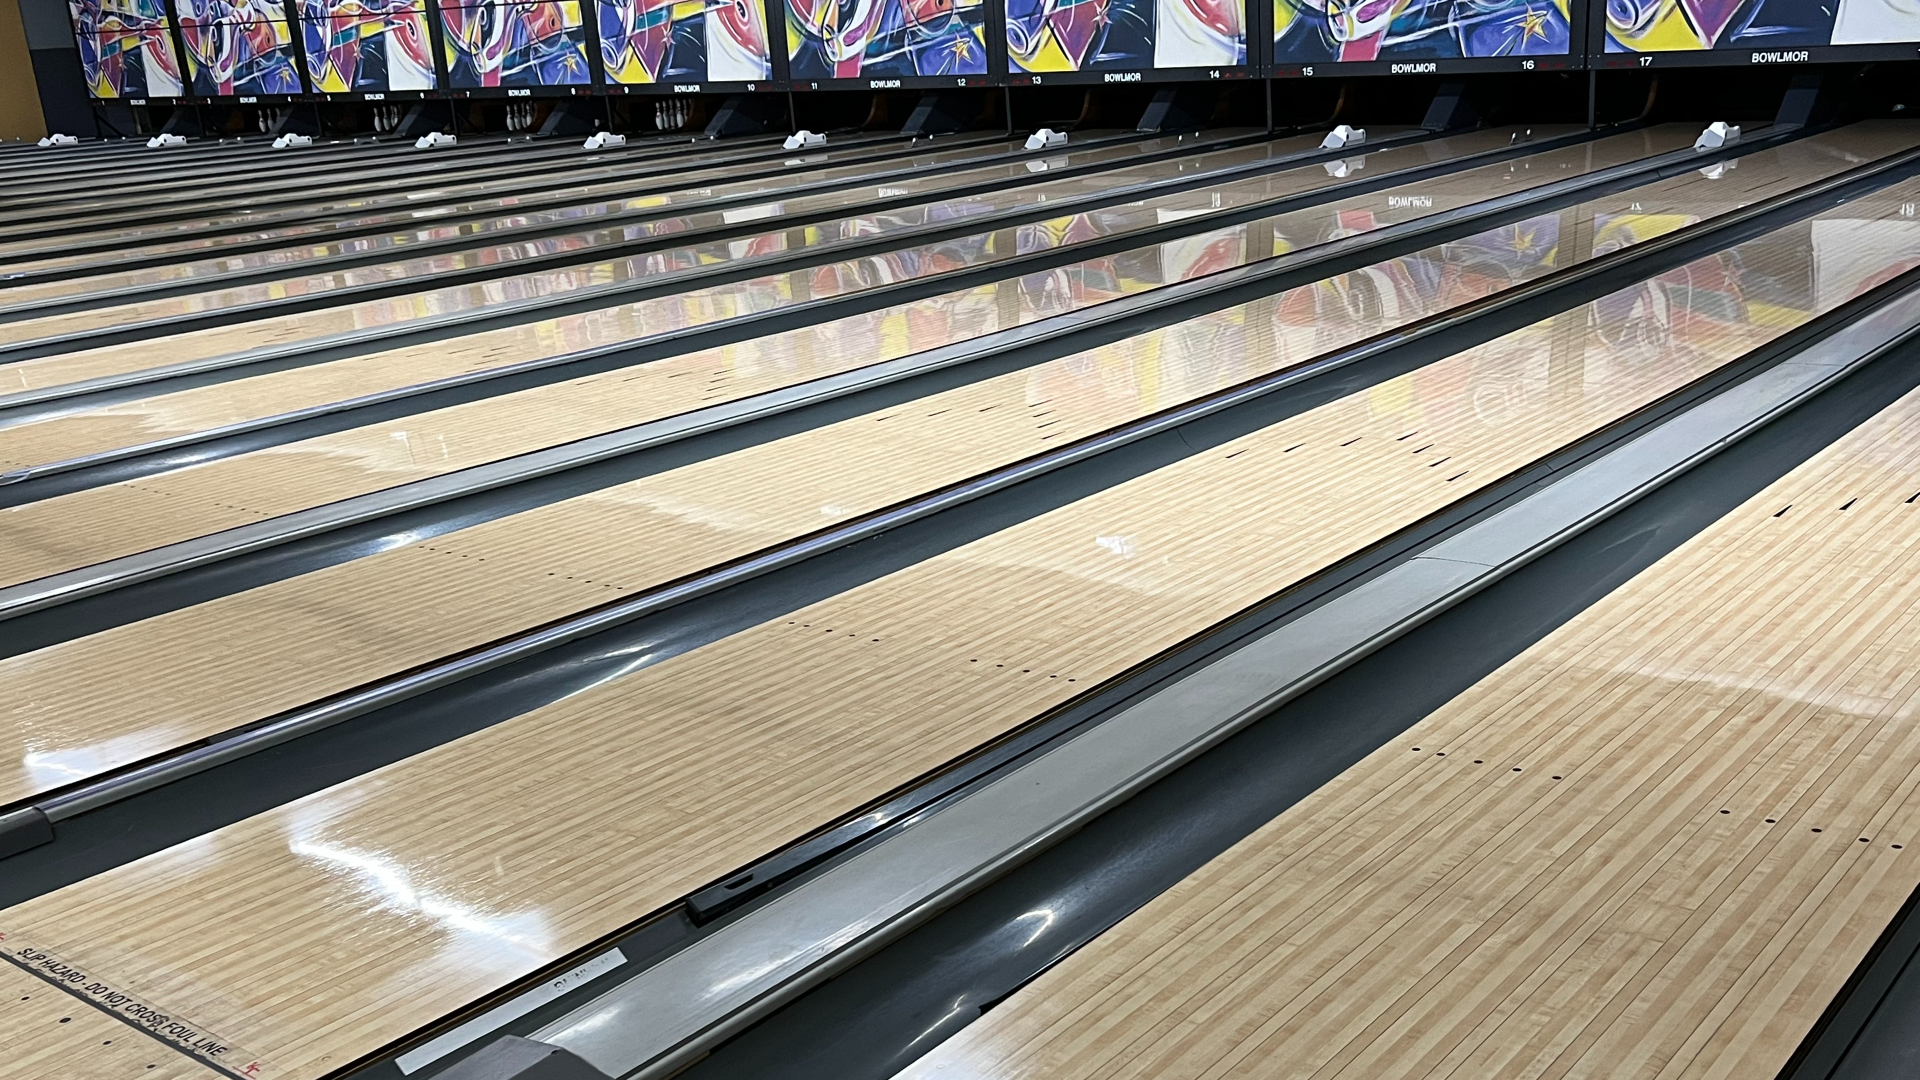 Bowlers compete in Mid-States Championship